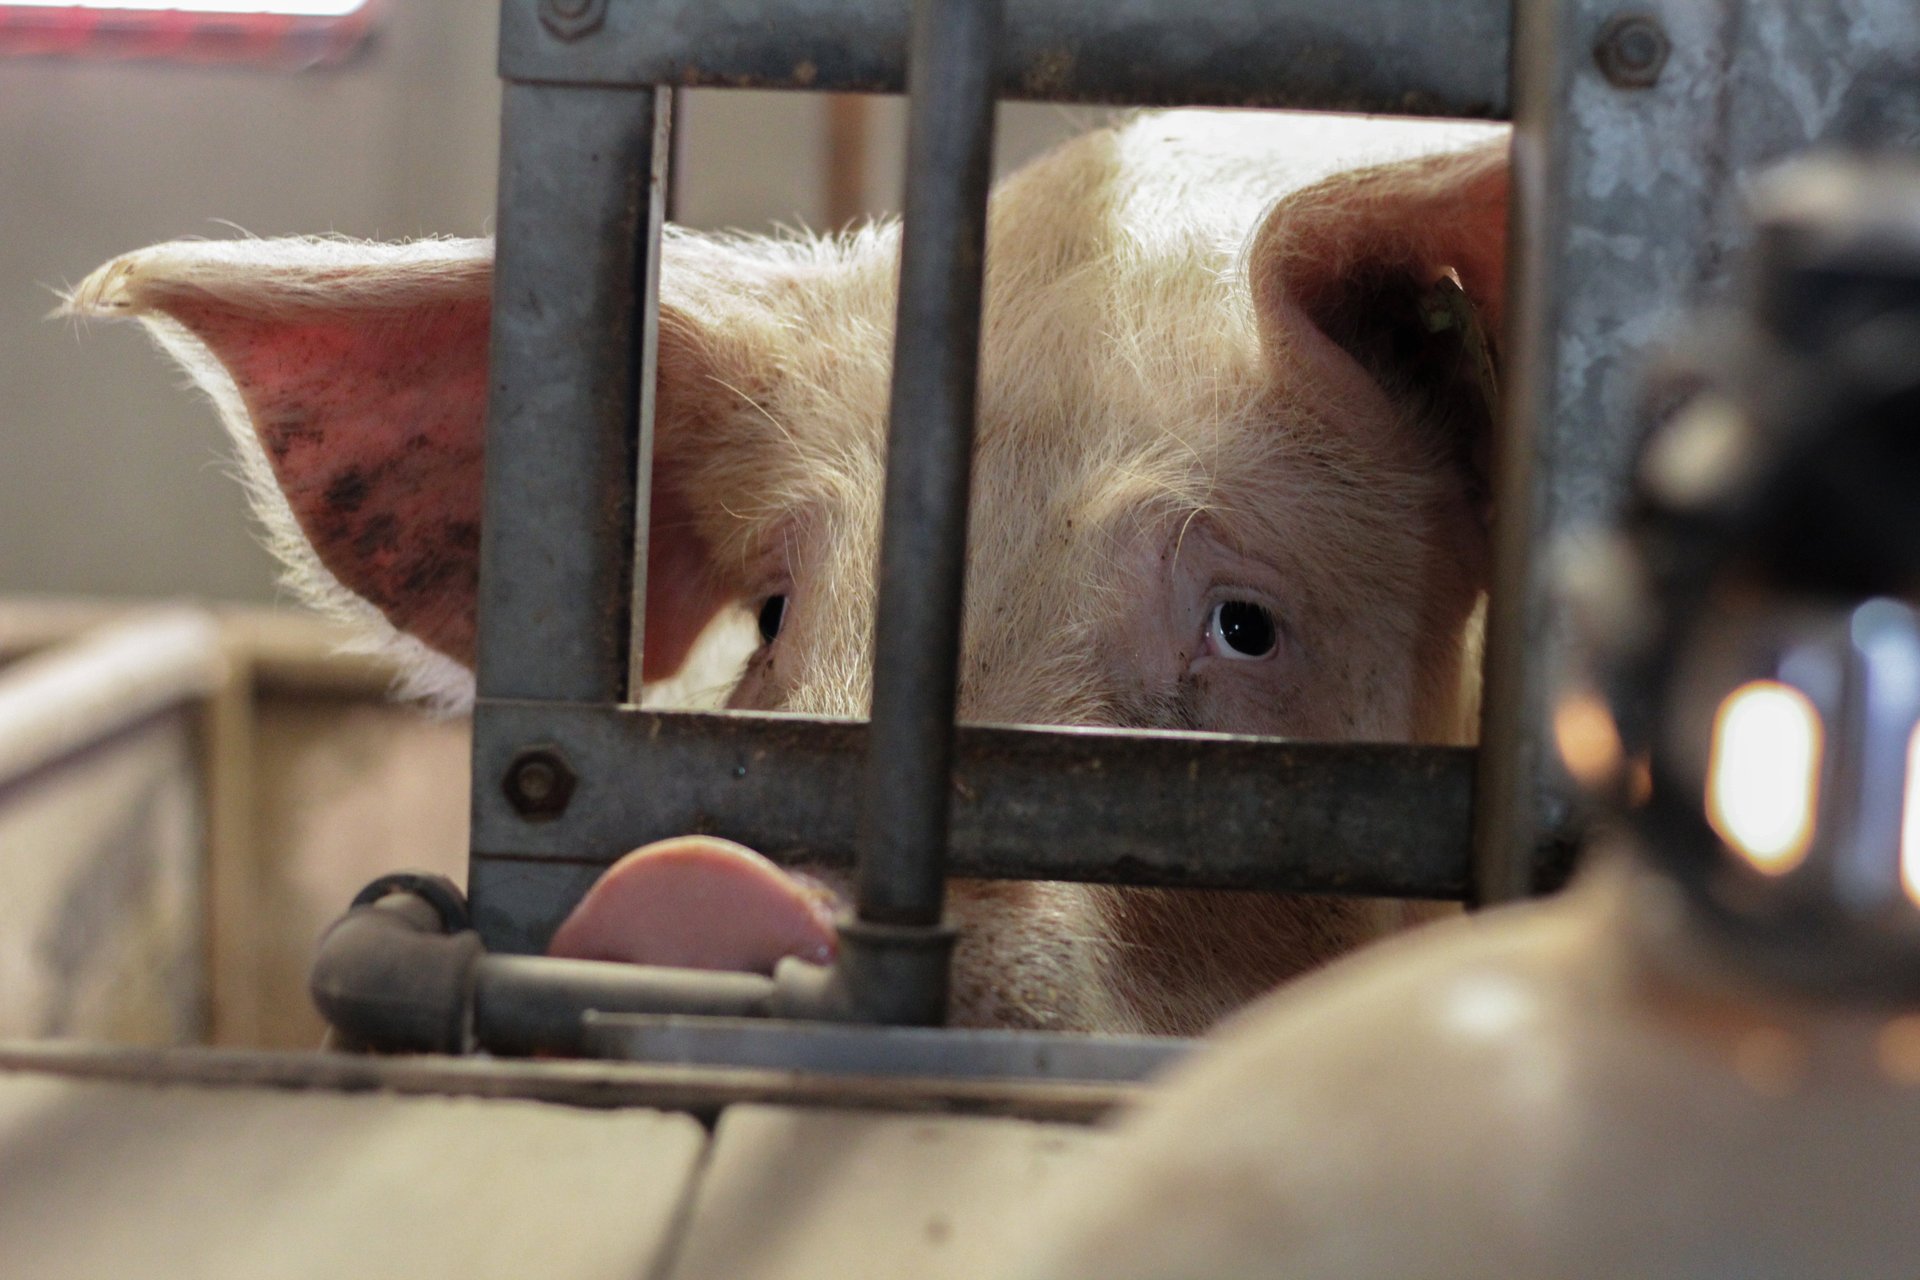 A pig is looking out of a cage. It looks sad and frightened.